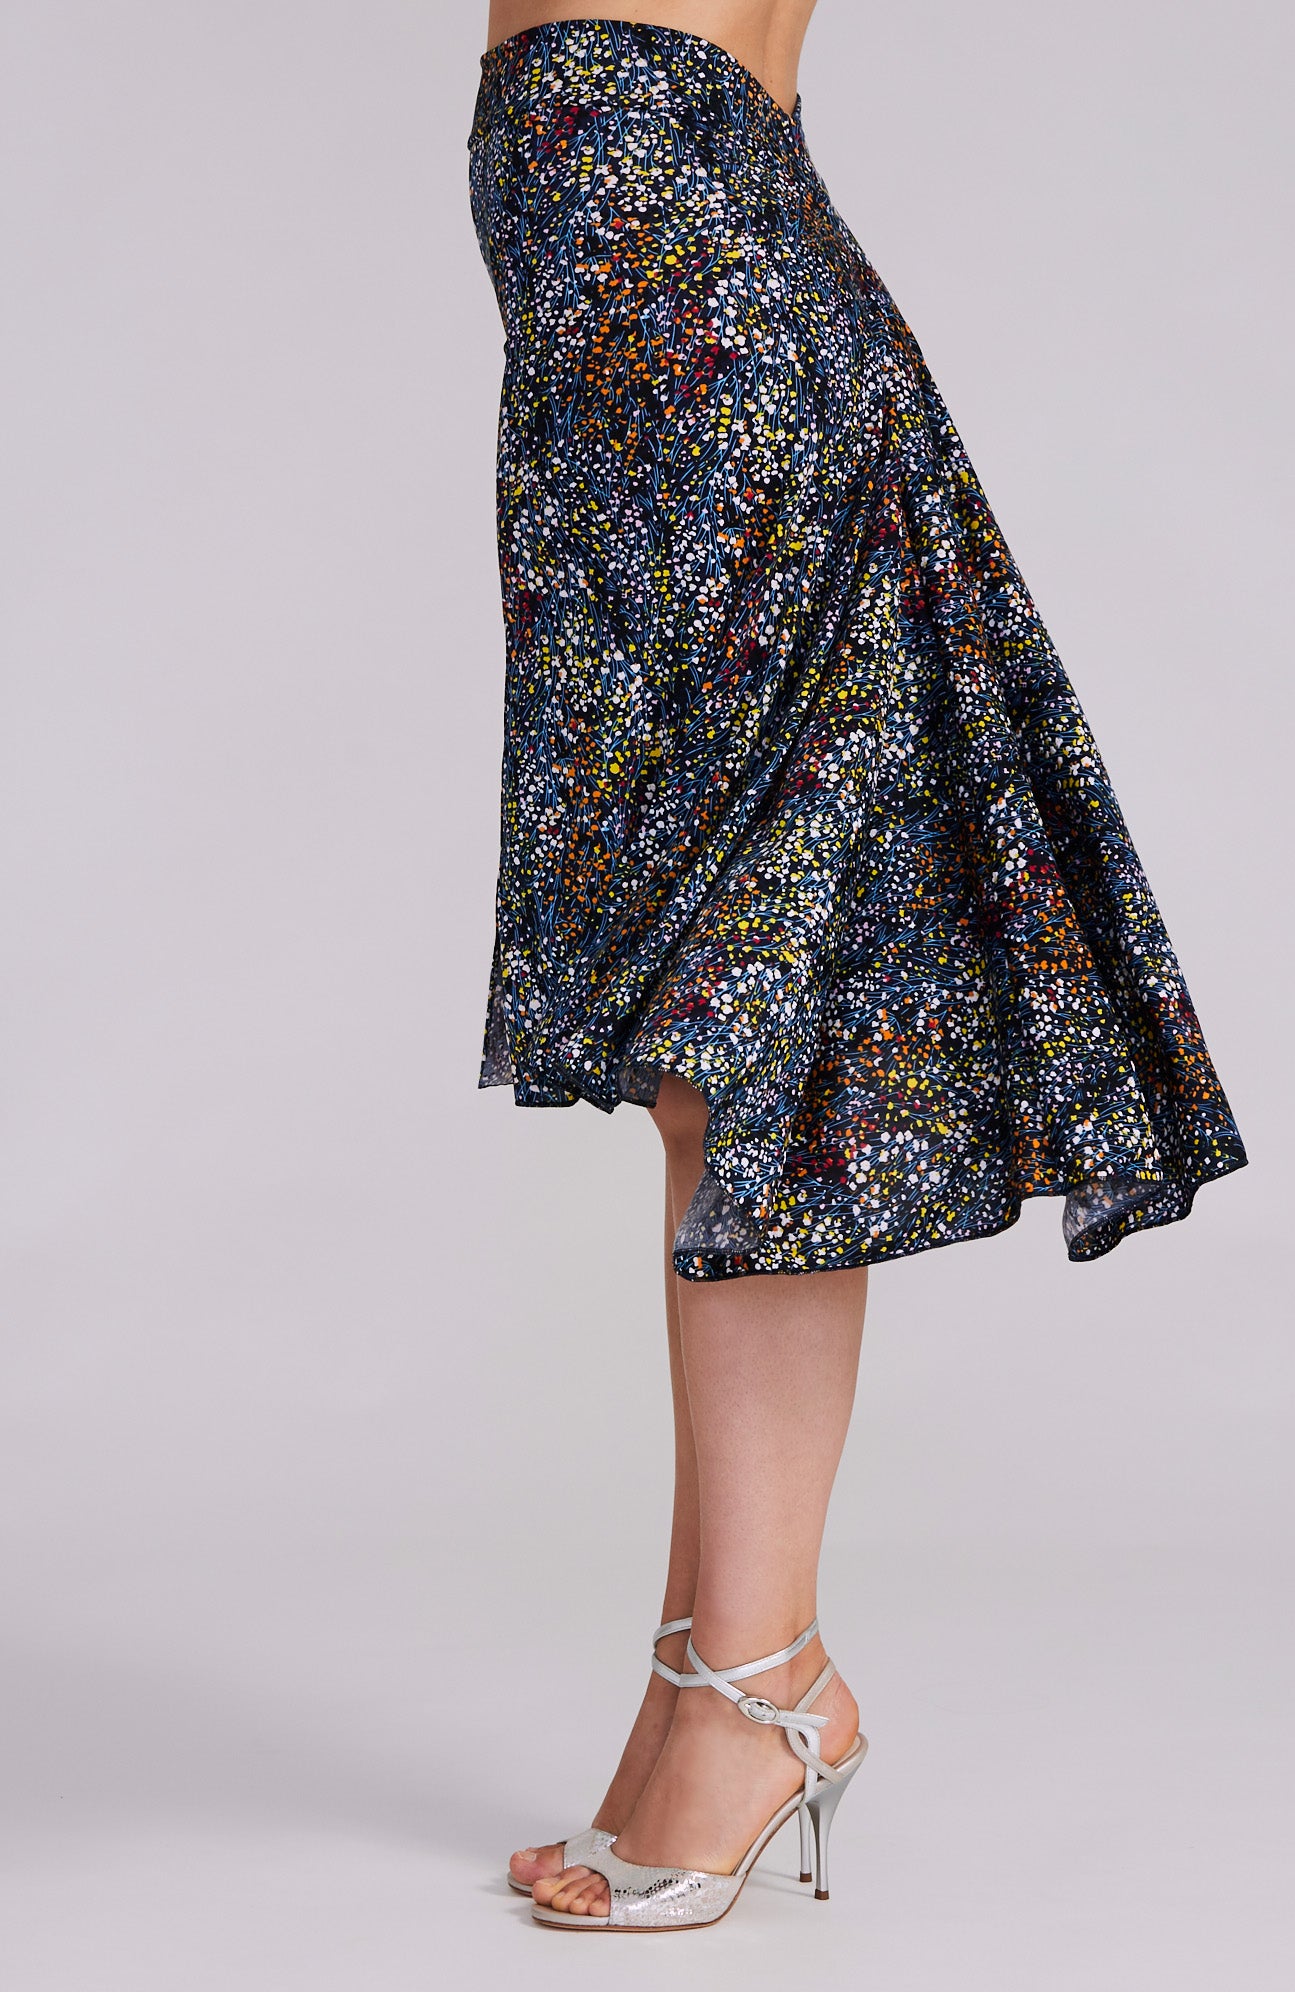 PAOLA - Argentine Tango Skirt in Dotted Flowers (with Slit)